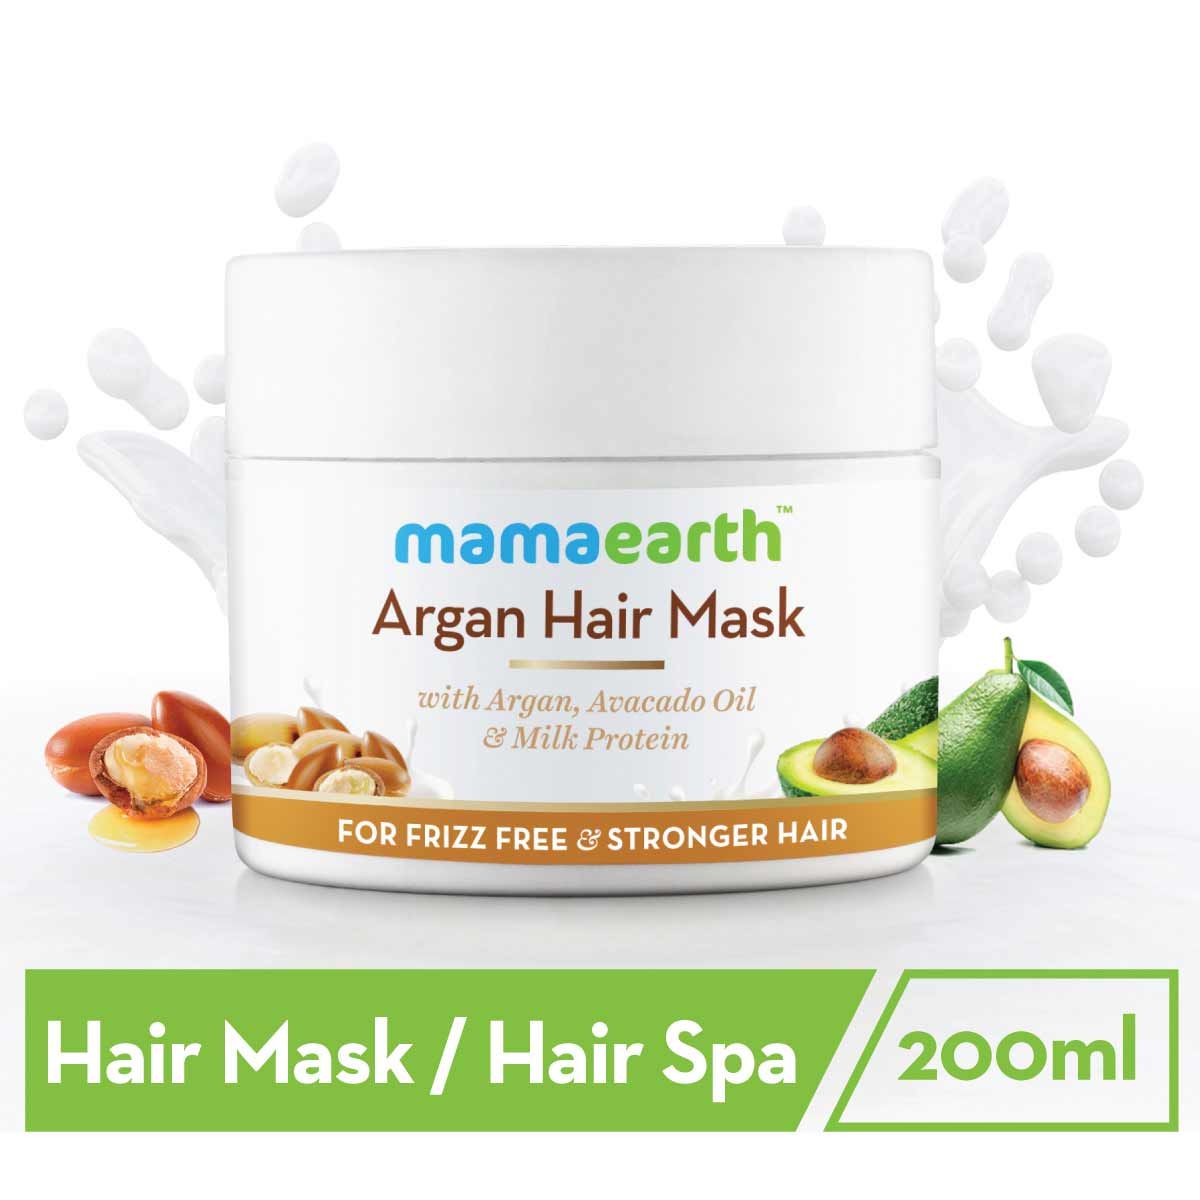 Mamaearth Argan Hair Mask Better Than Others Available In The Market